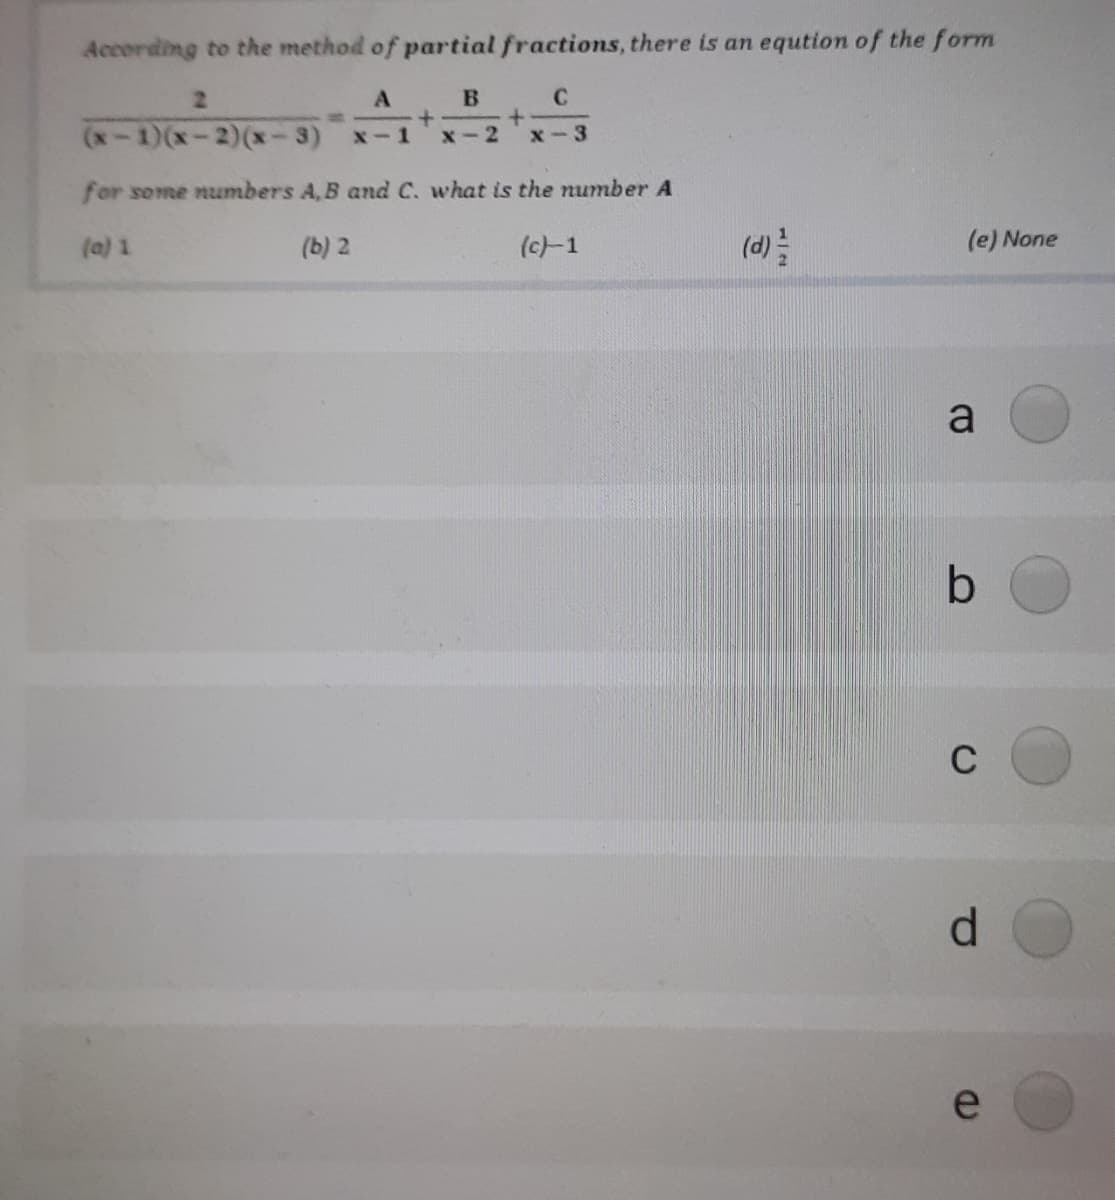 According to the method of partial fractions, there is an eqution of the form
2.
C
A
+.
x-1
(x-1)(x-2)(x-3)
x-2
x-3
for some numbers A, B and C. what is the number A
(a) 1
(b) 2
(c-1
(a):
(e) None
a
C
d.
e
জ |
